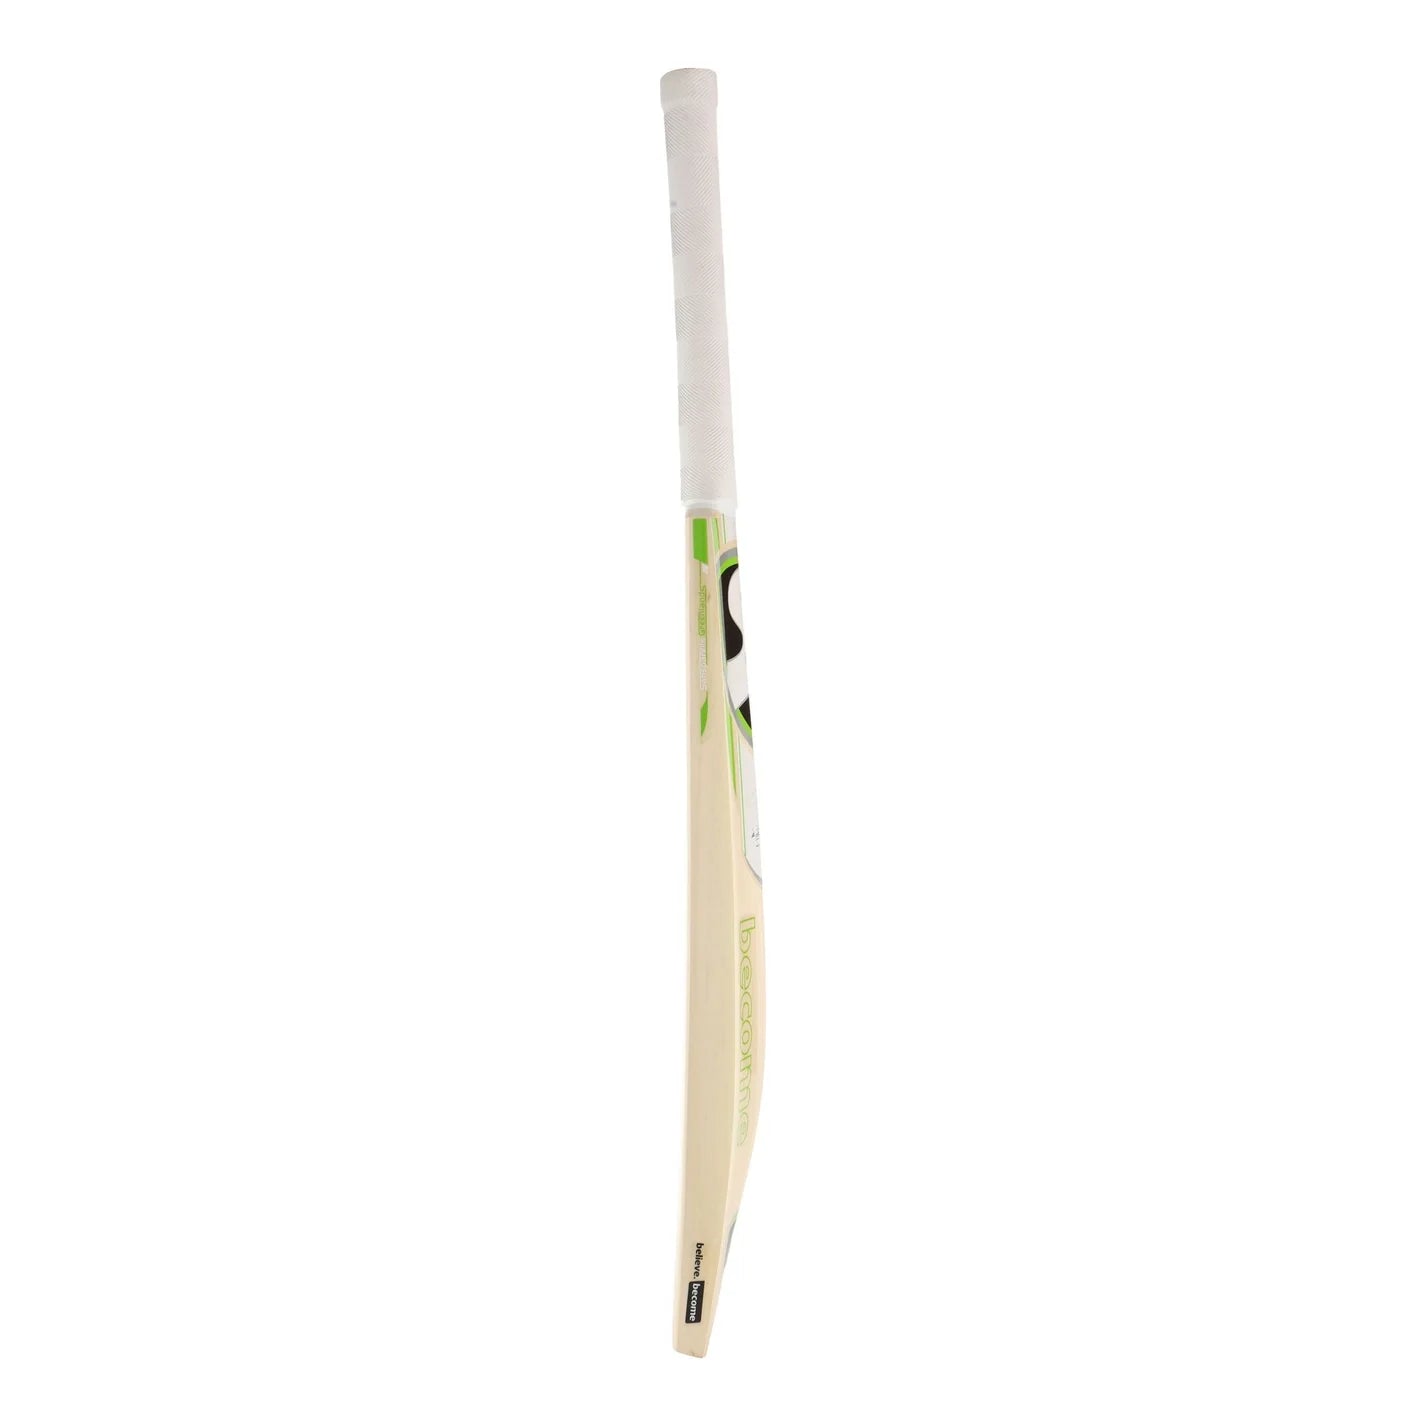 SG Strokewell Xtreme Premium Kashmir Willow traditional shaped Cricket Bat